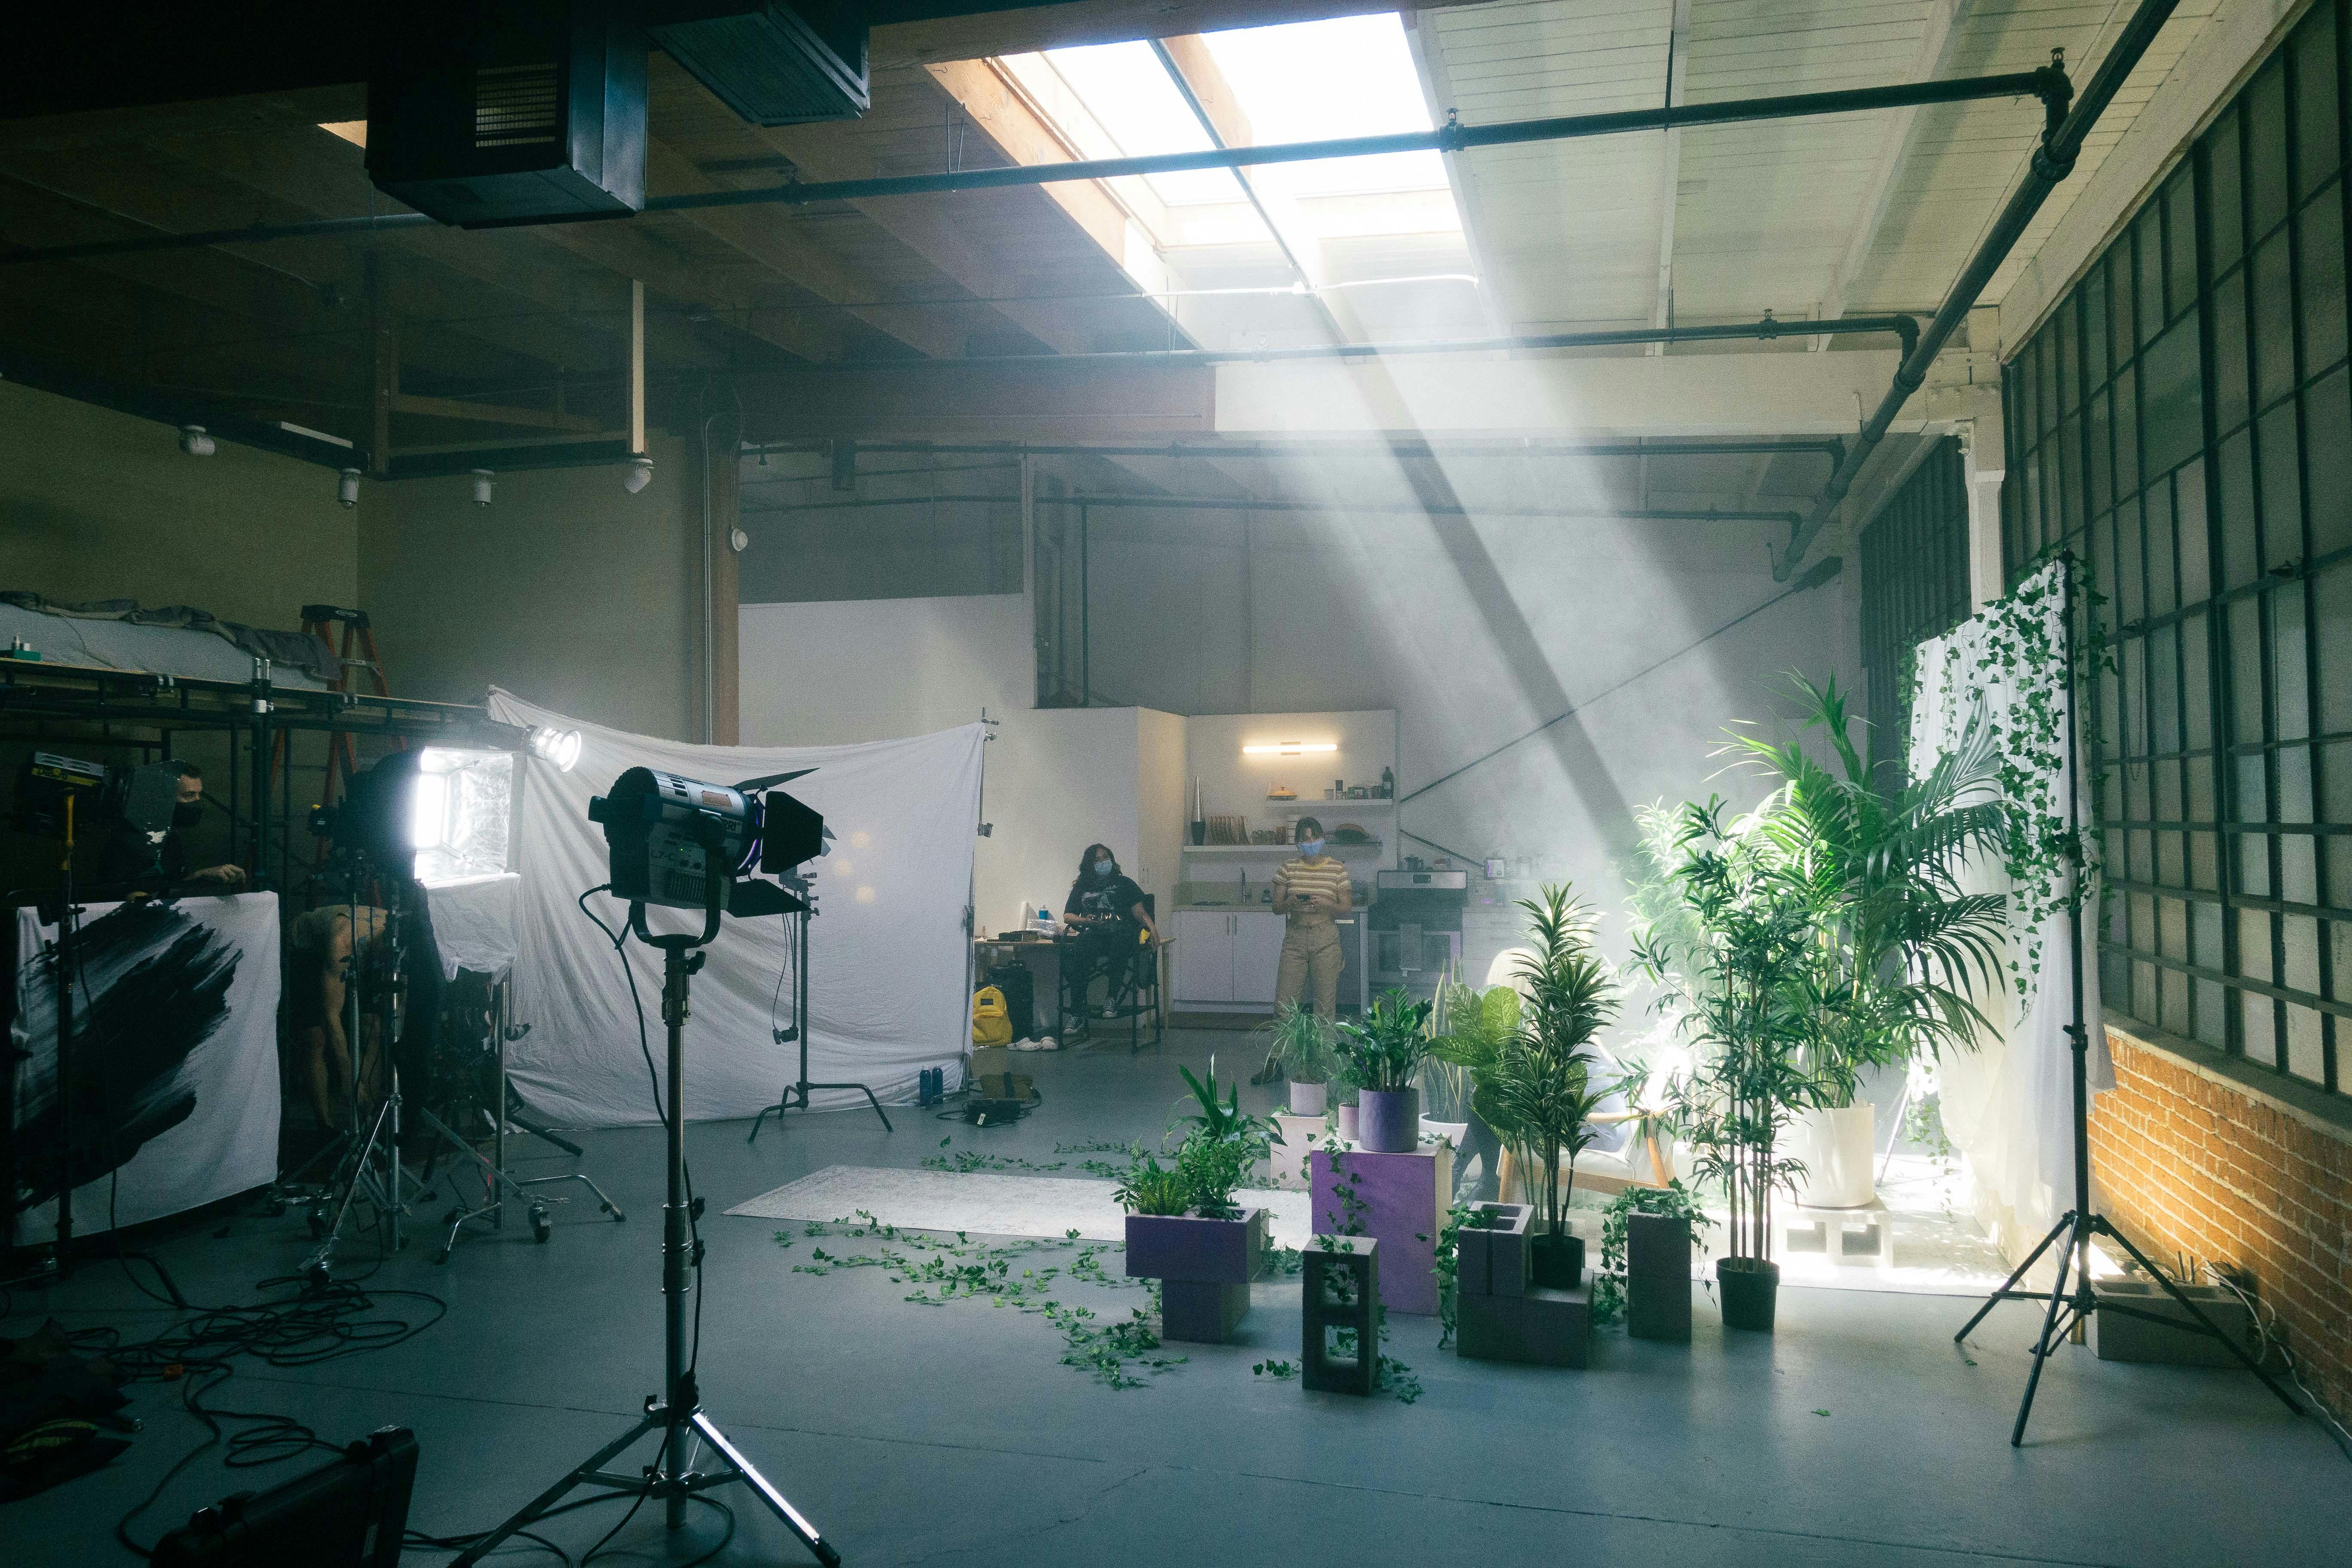 A studio space being used for a film shoot